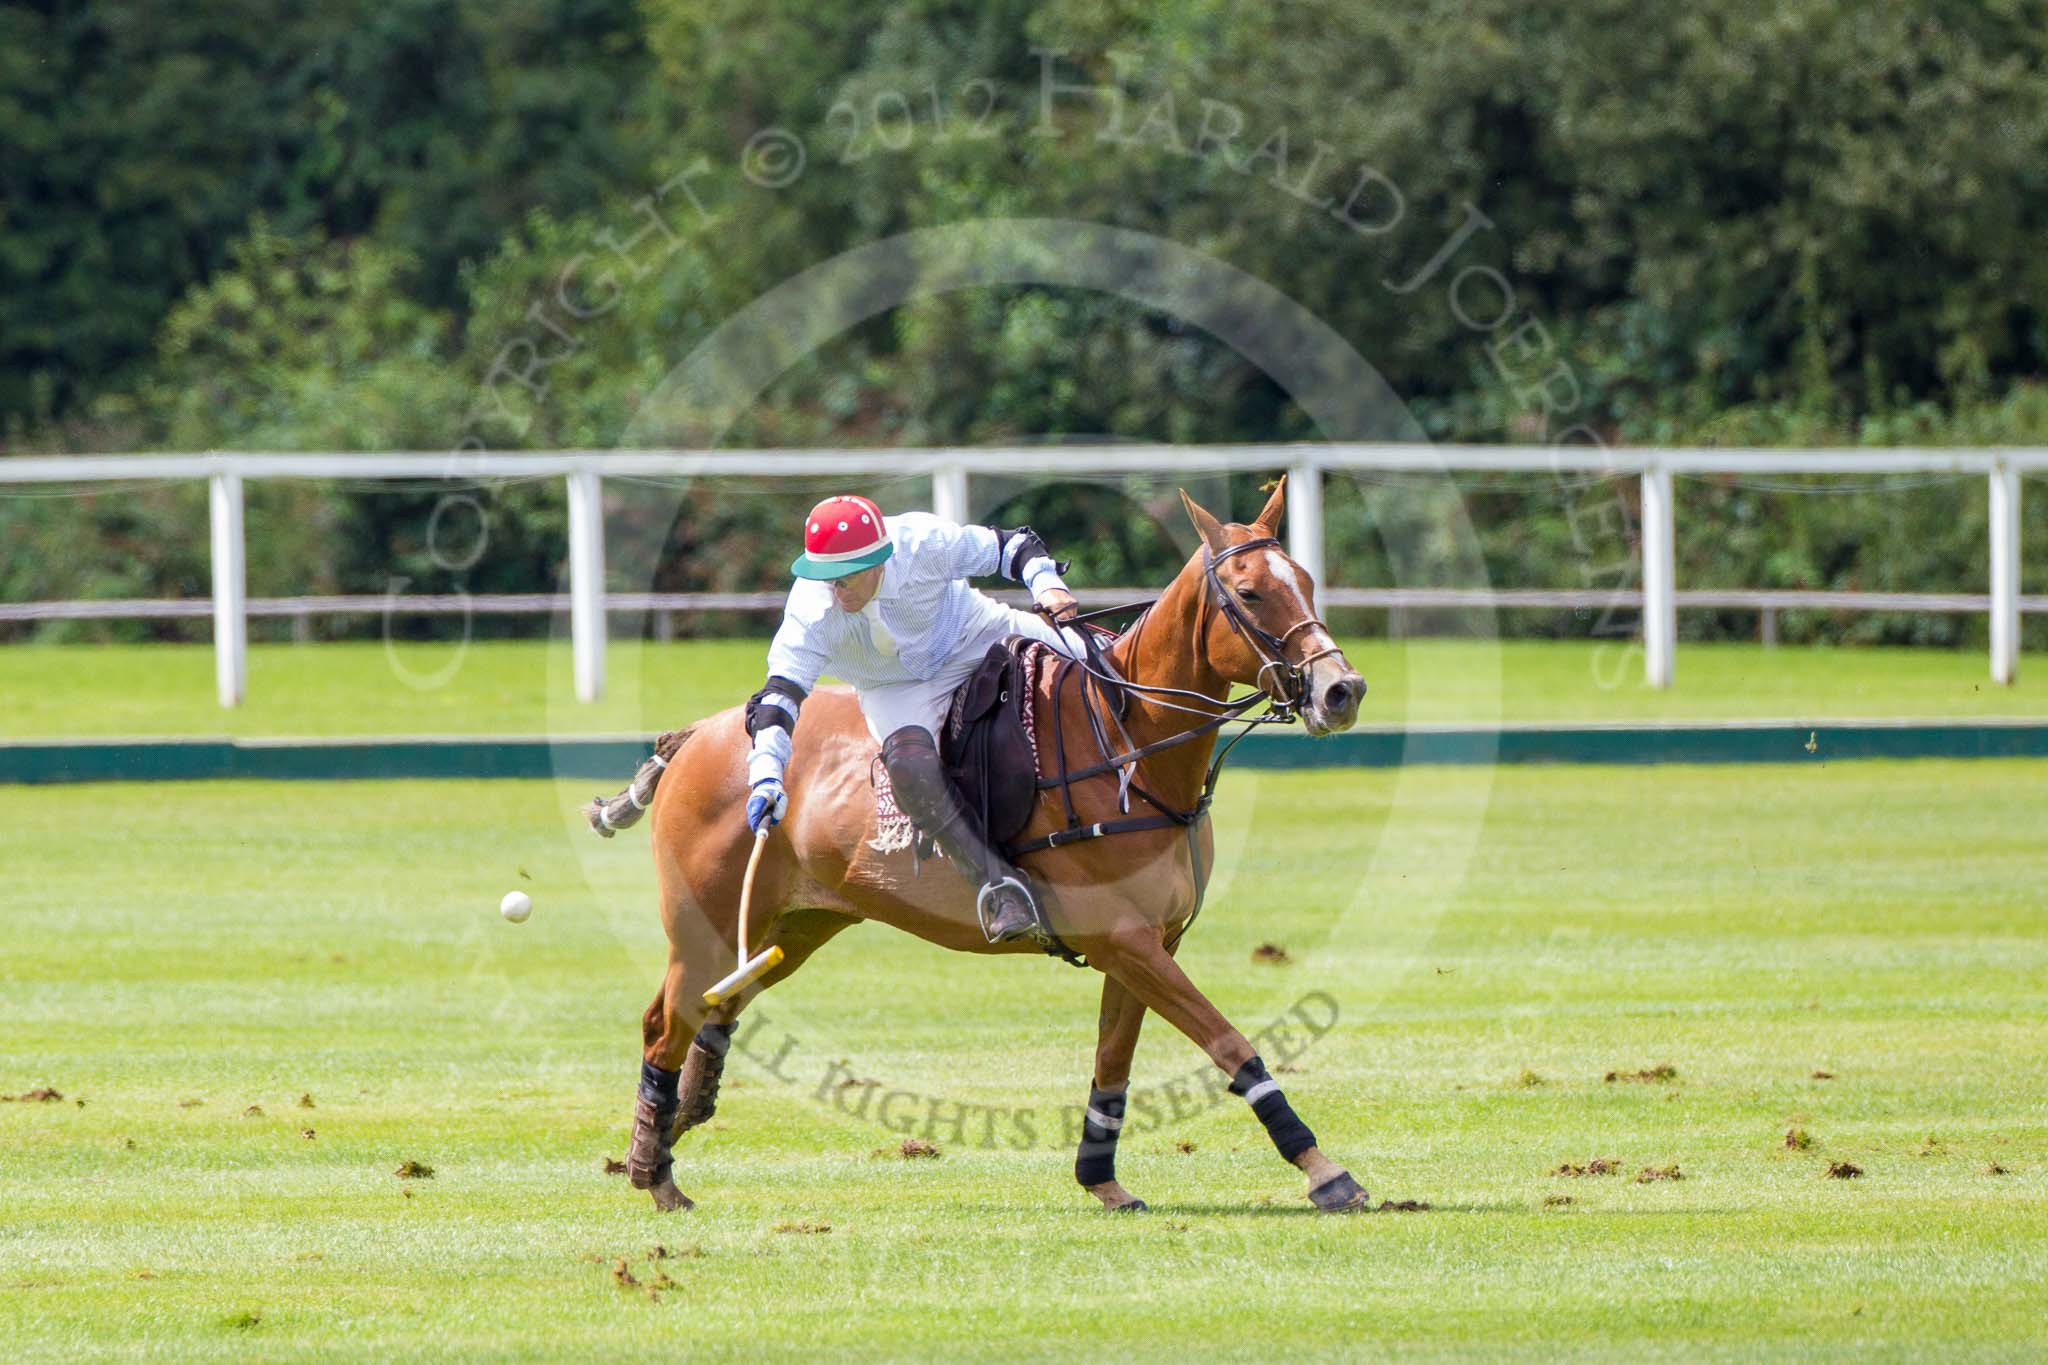 7th Heritage Polo Cup finals: Sebastian Funes..
Hurtwood Park Polo Club,
Ewhurst Green,
Surrey,
United Kingdom,
on 05 August 2012 at 13:33, image #28